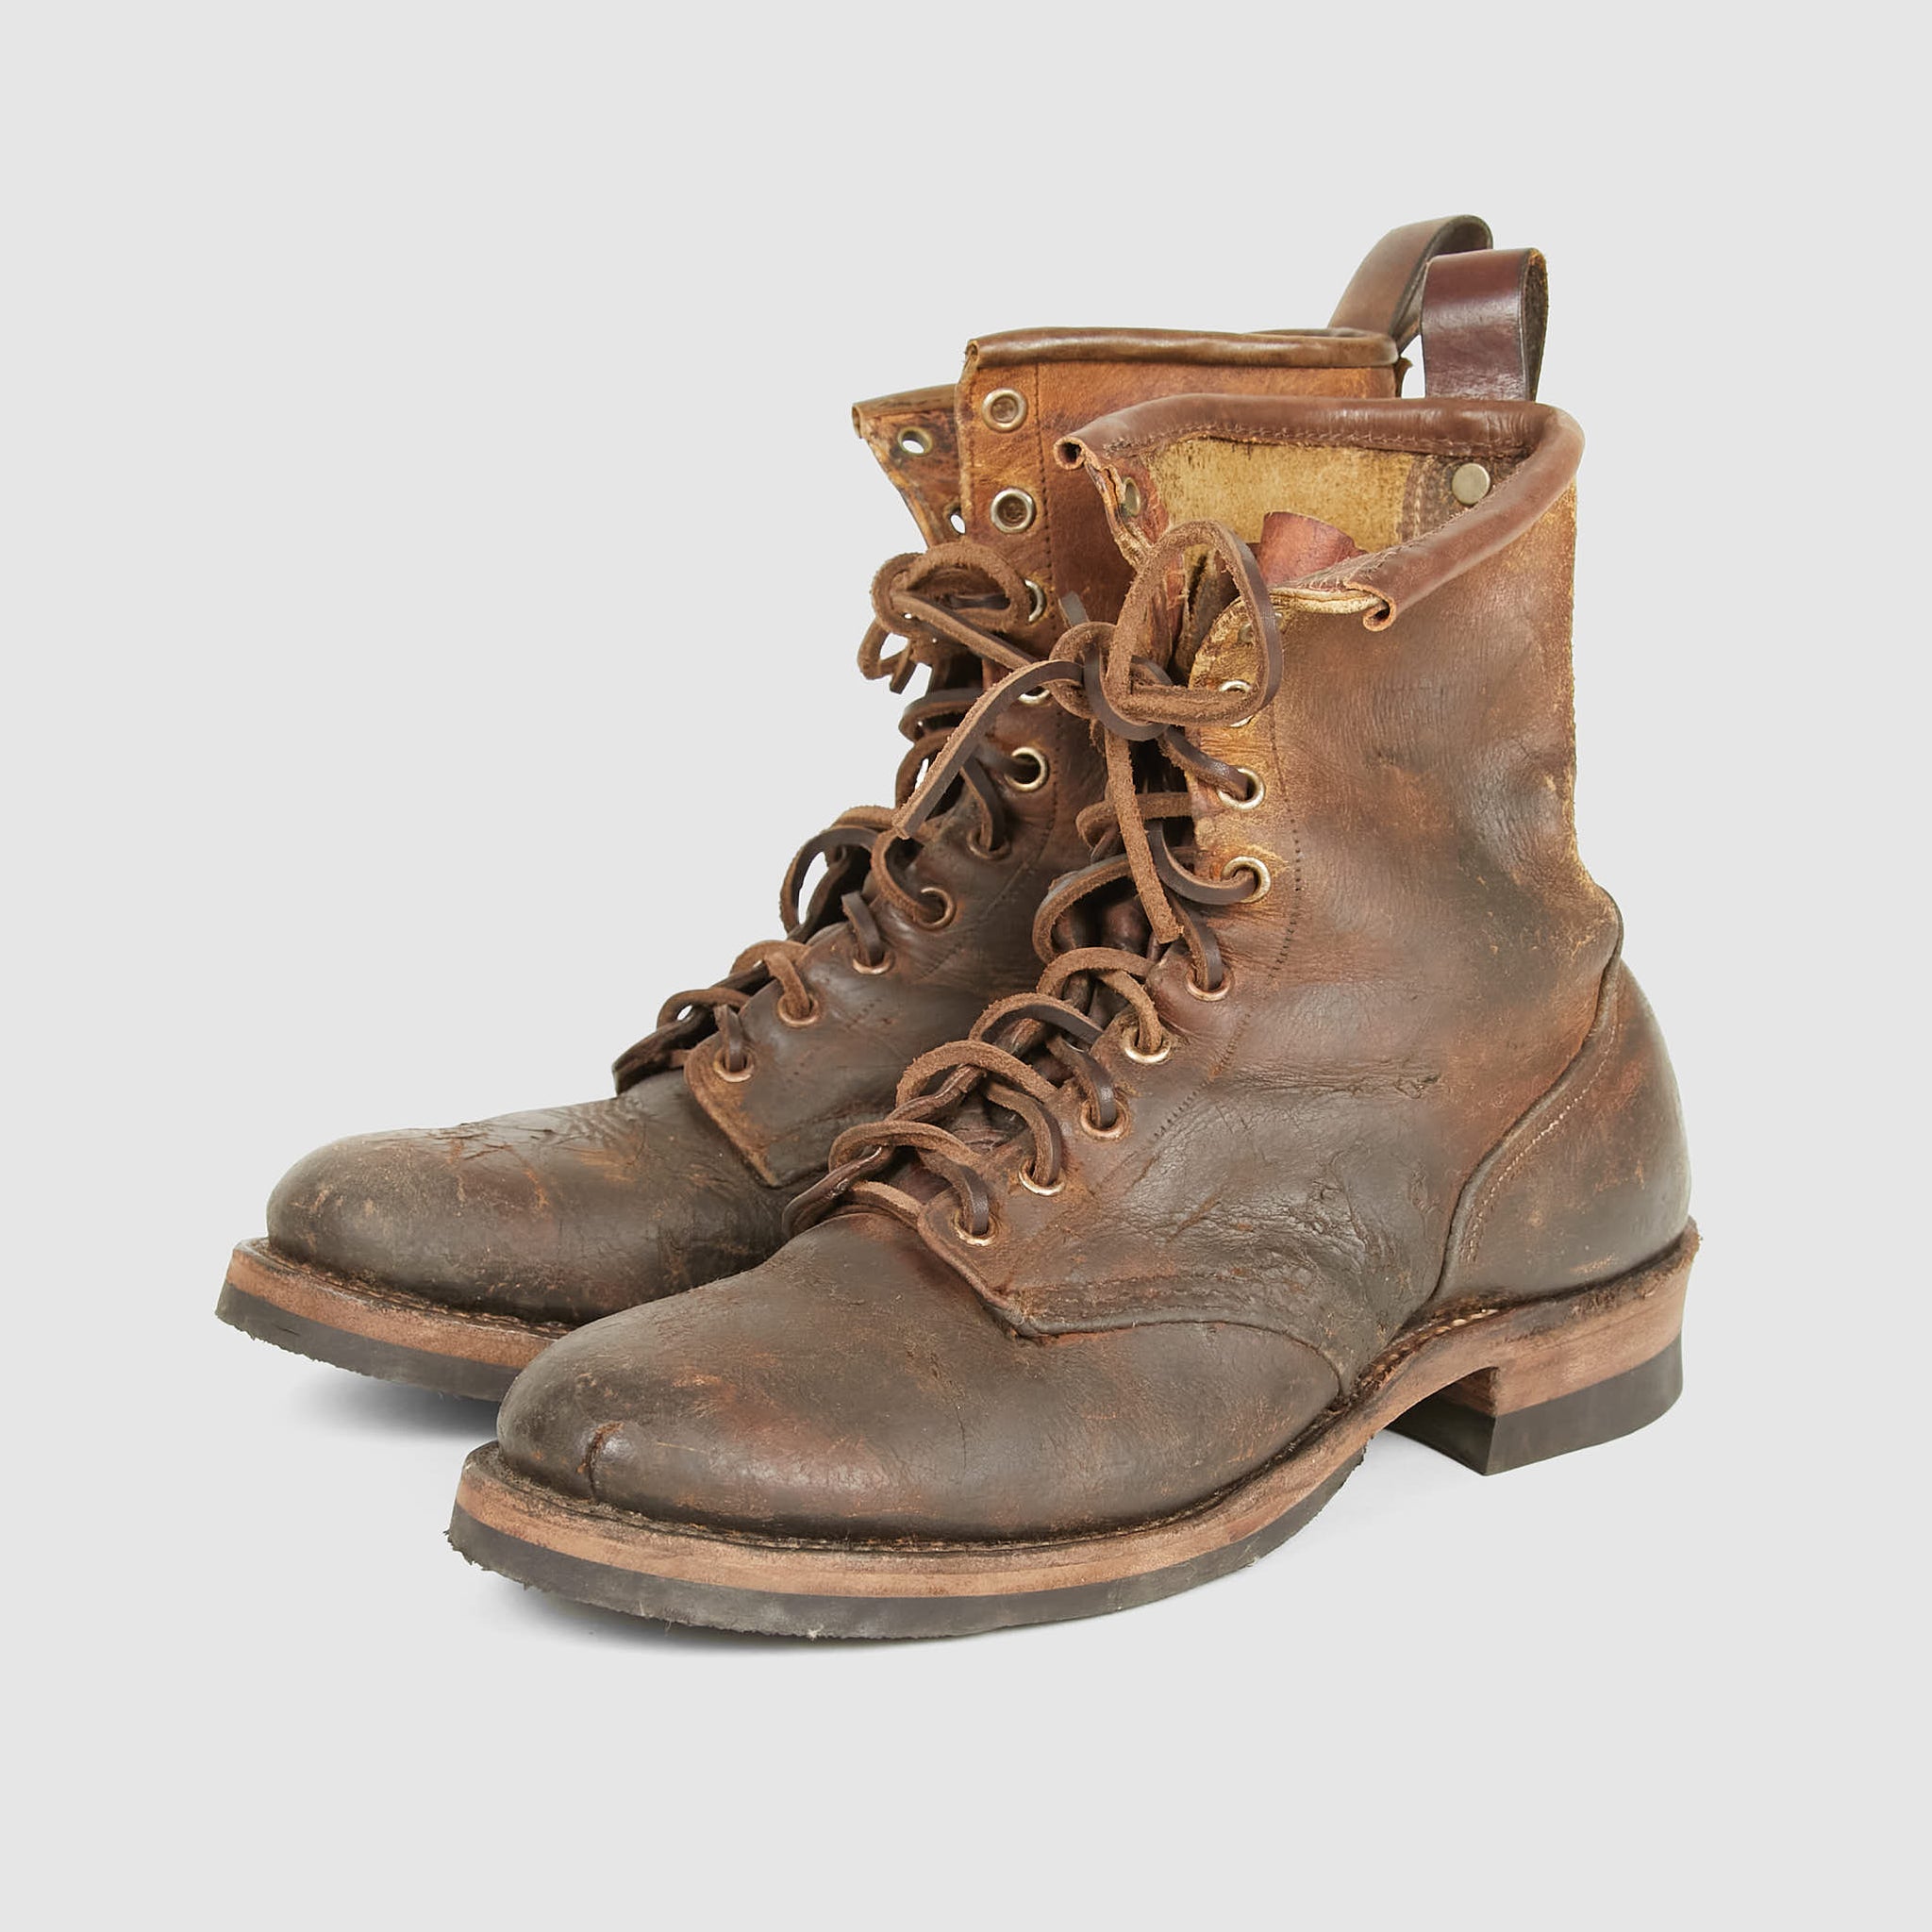 Vintage Military Boots